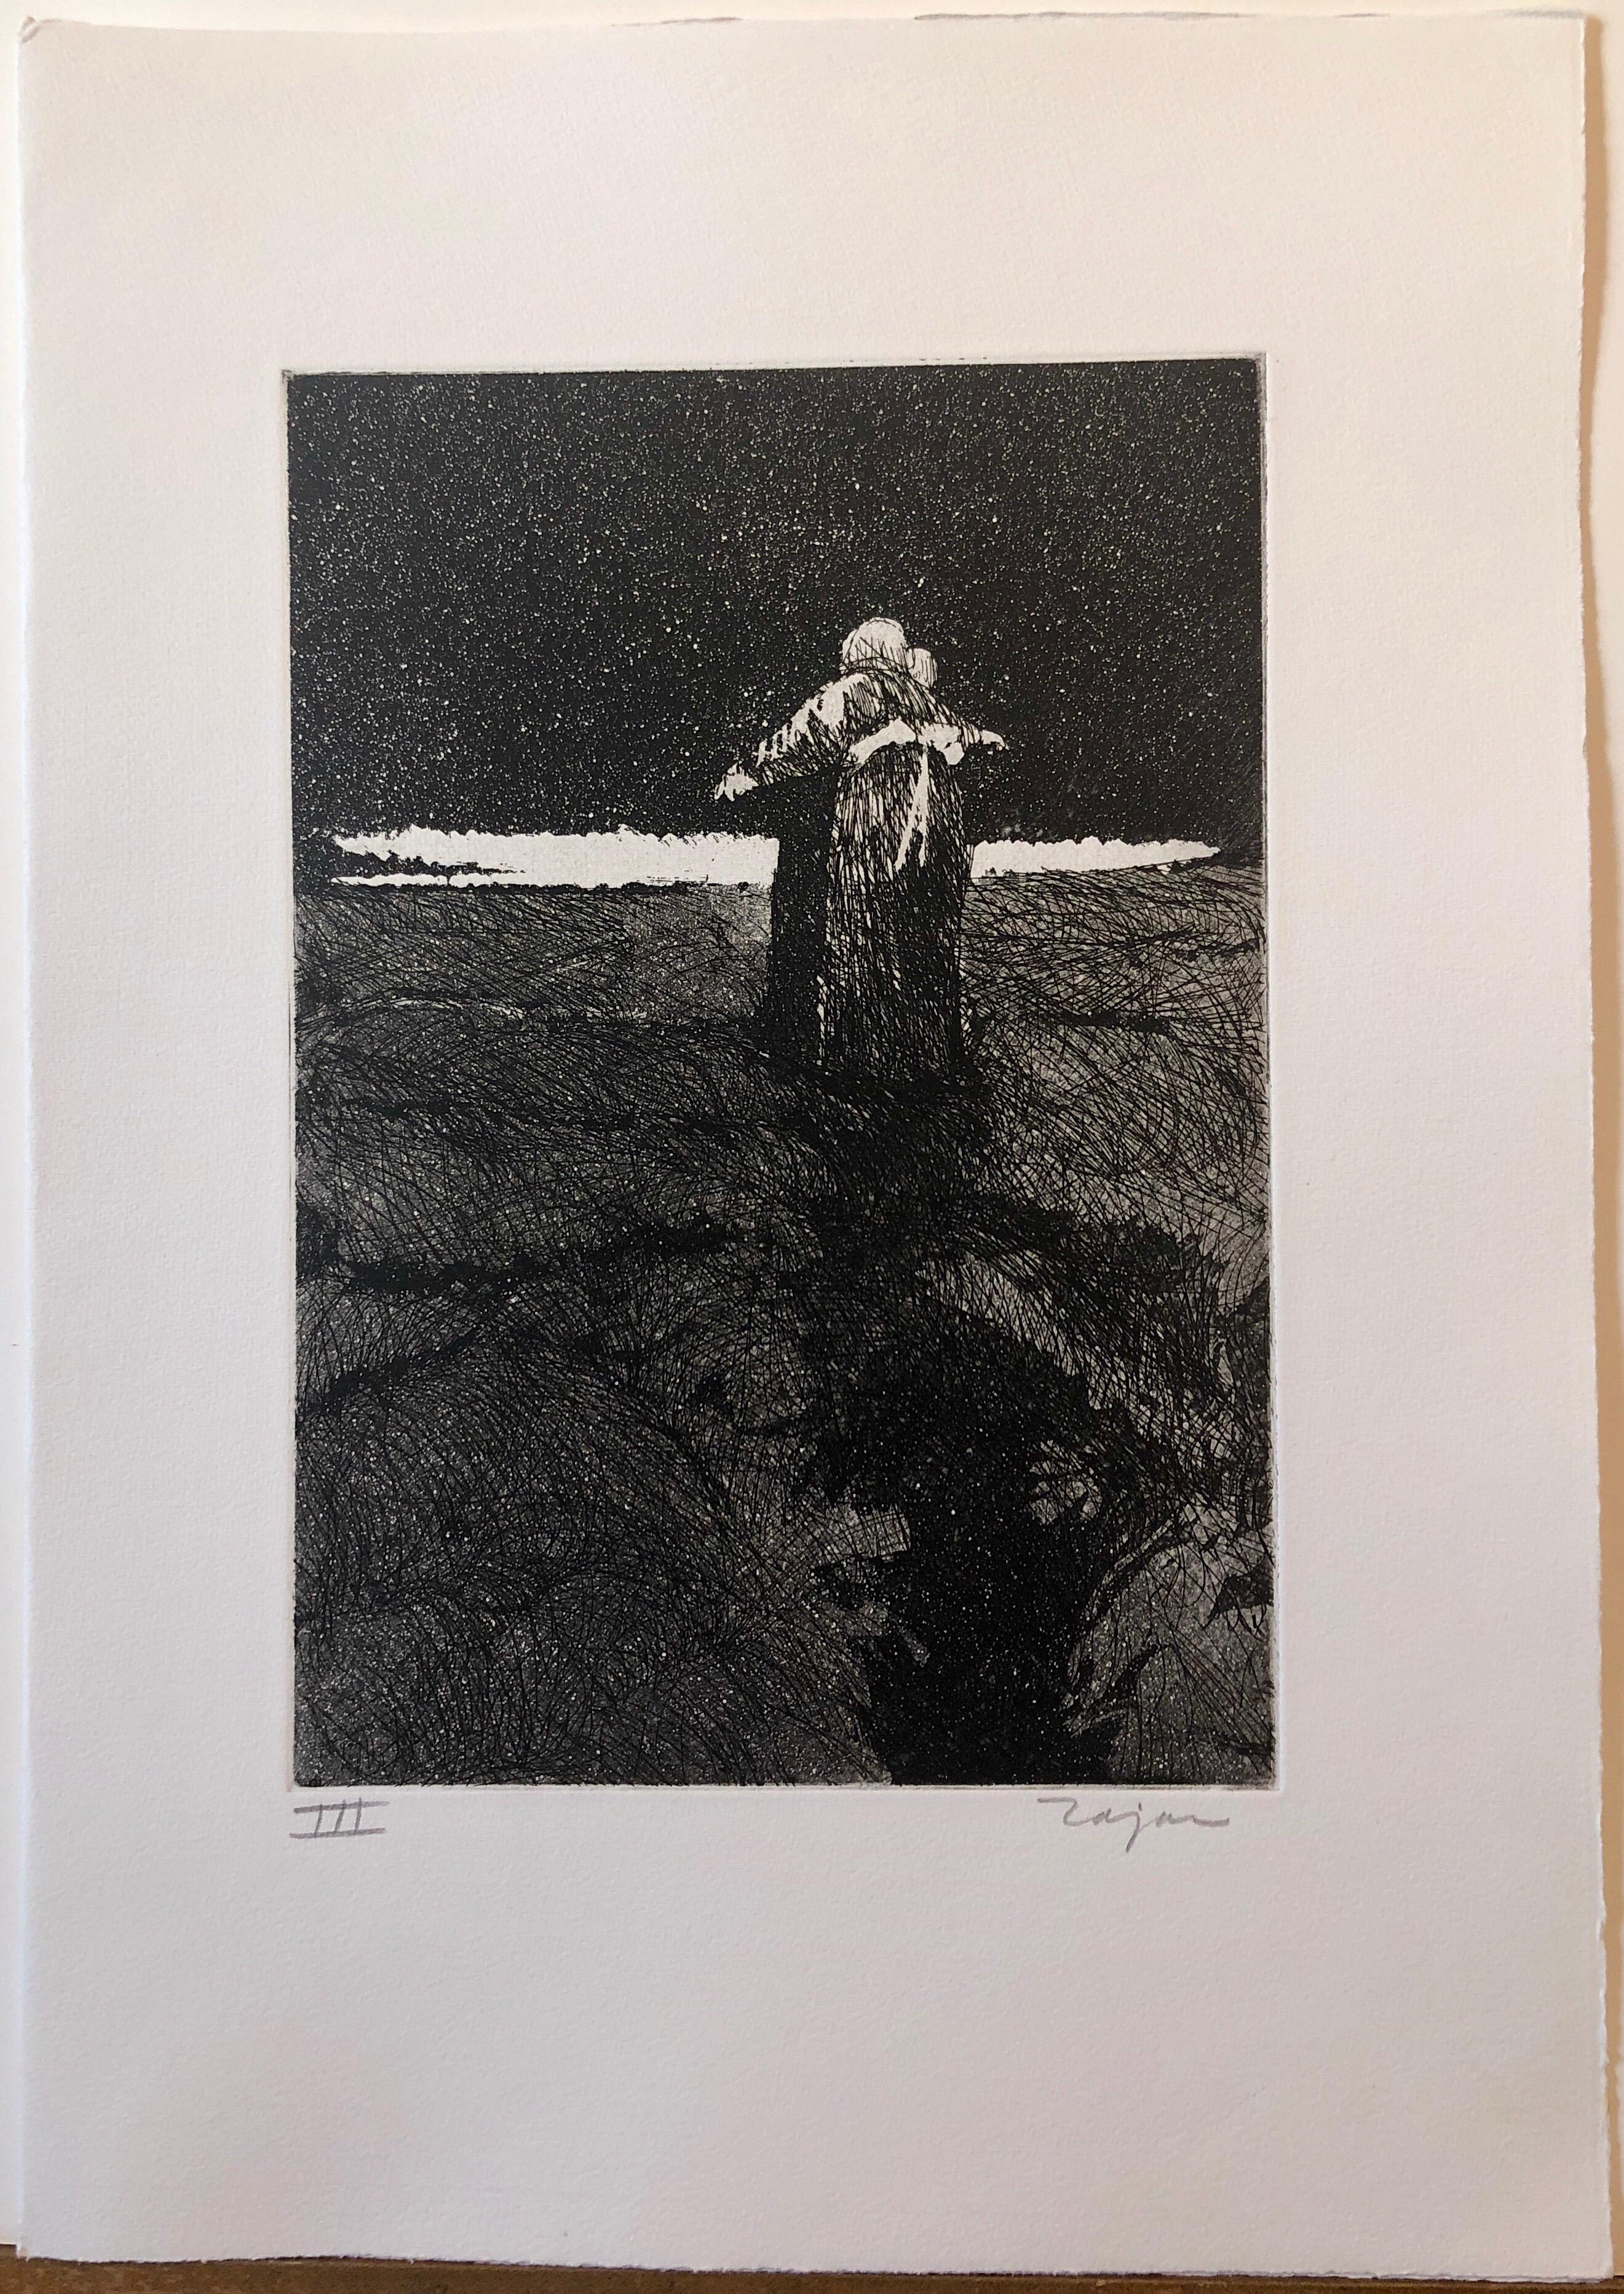 Jack Zajac, American, born 1929
1964 Etching and aquatint hand printed on Fabriano paper, pencil signed and editioned. 
This one depicts lovers embracing
Edition Roman Numeral III
Image: 12 9/16 x 8 5/8 in. (31.9 x 21.9 cm)
Sheet: 20 x 14 in. (50.8